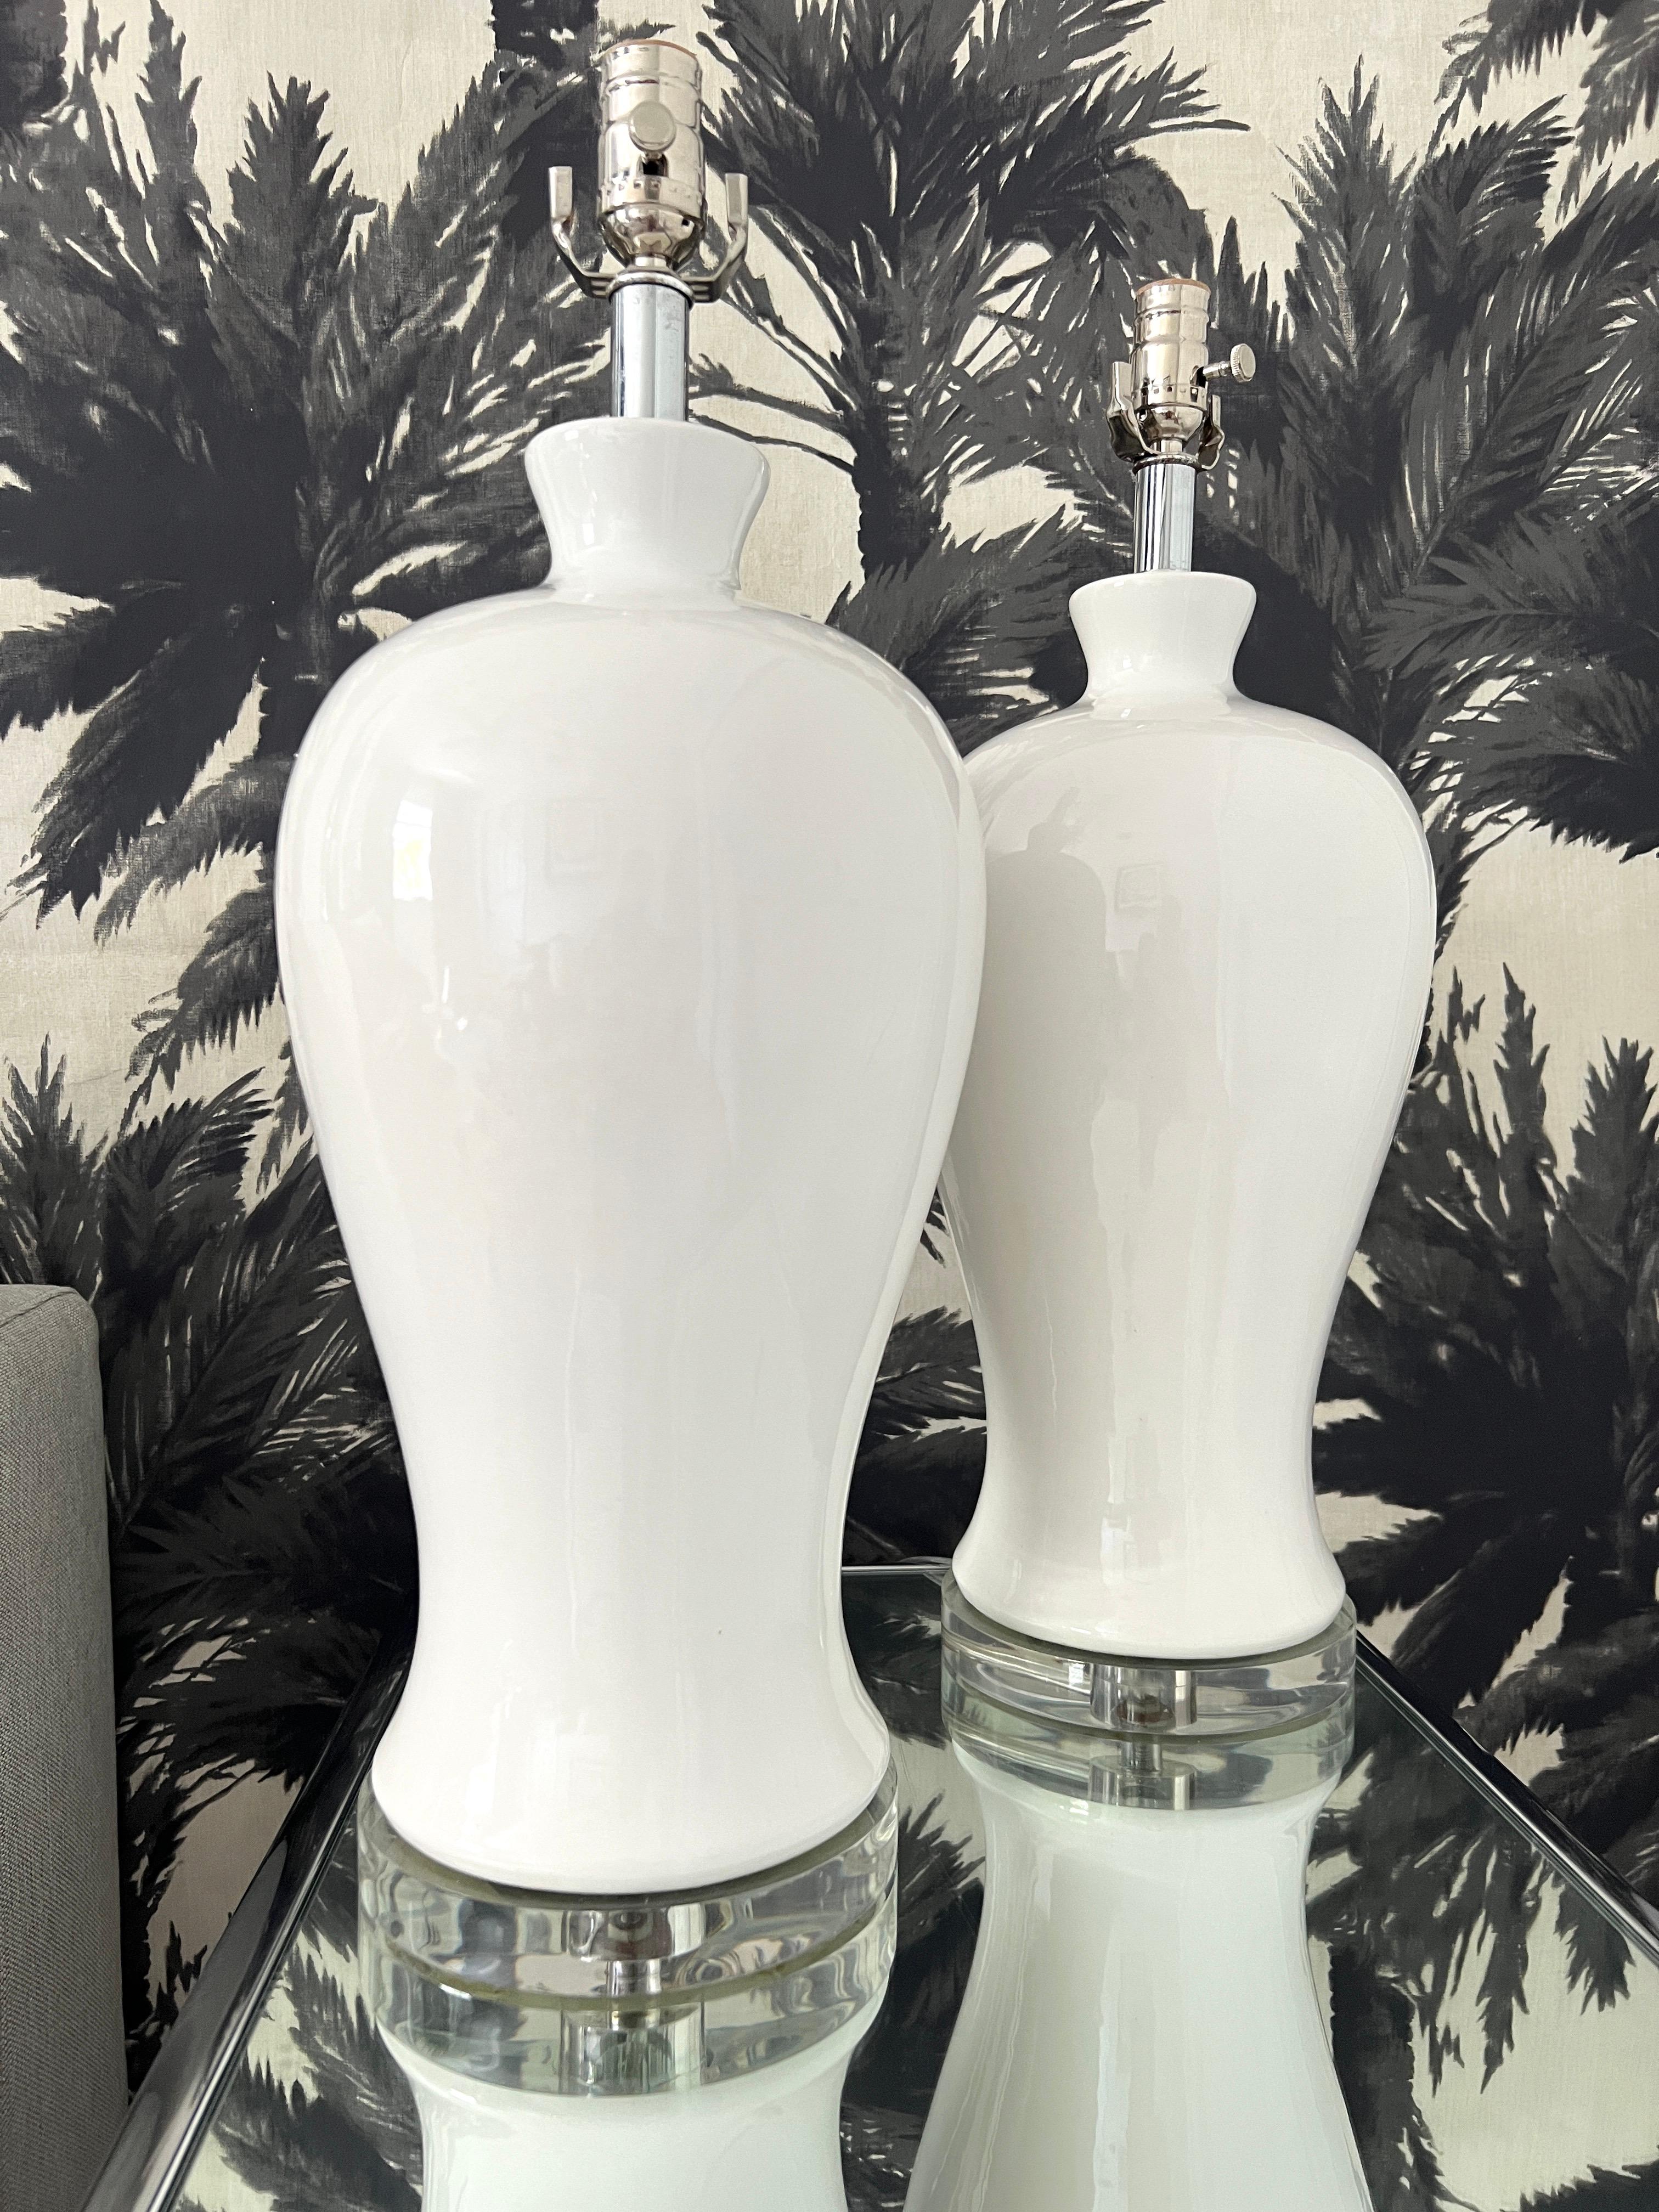 Glazed Pair of Modernist Ceramic Urn Lamps in White Glaze with Lucite Bases, c. 1960's For Sale